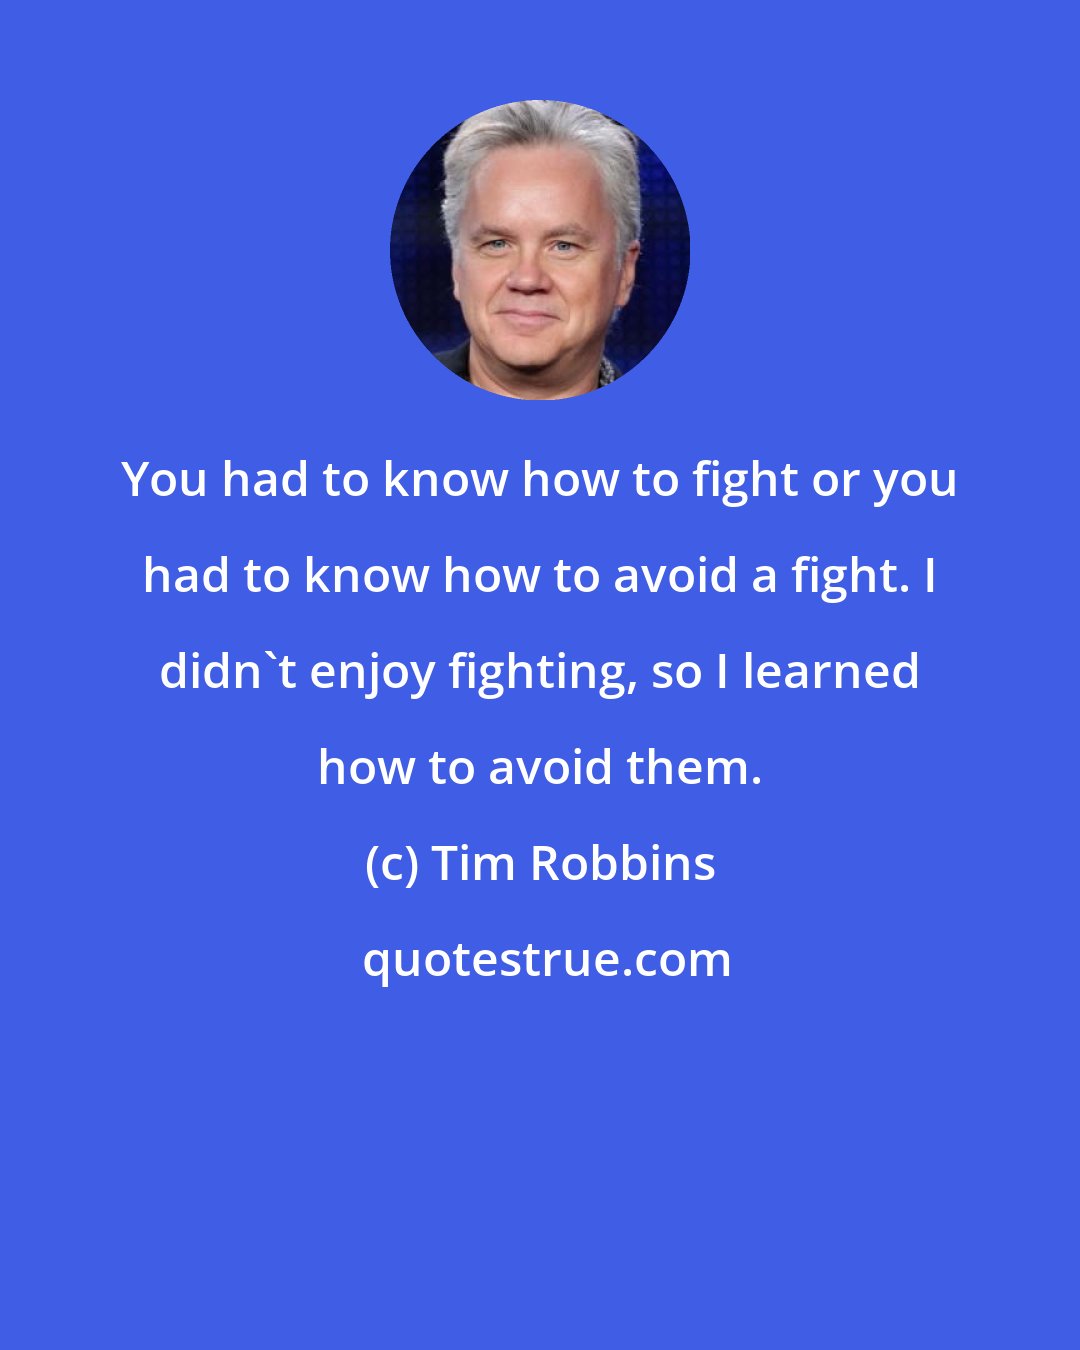 Tim Robbins: You had to know how to fight or you had to know how to avoid a fight. I didn't enjoy fighting, so I learned how to avoid them.